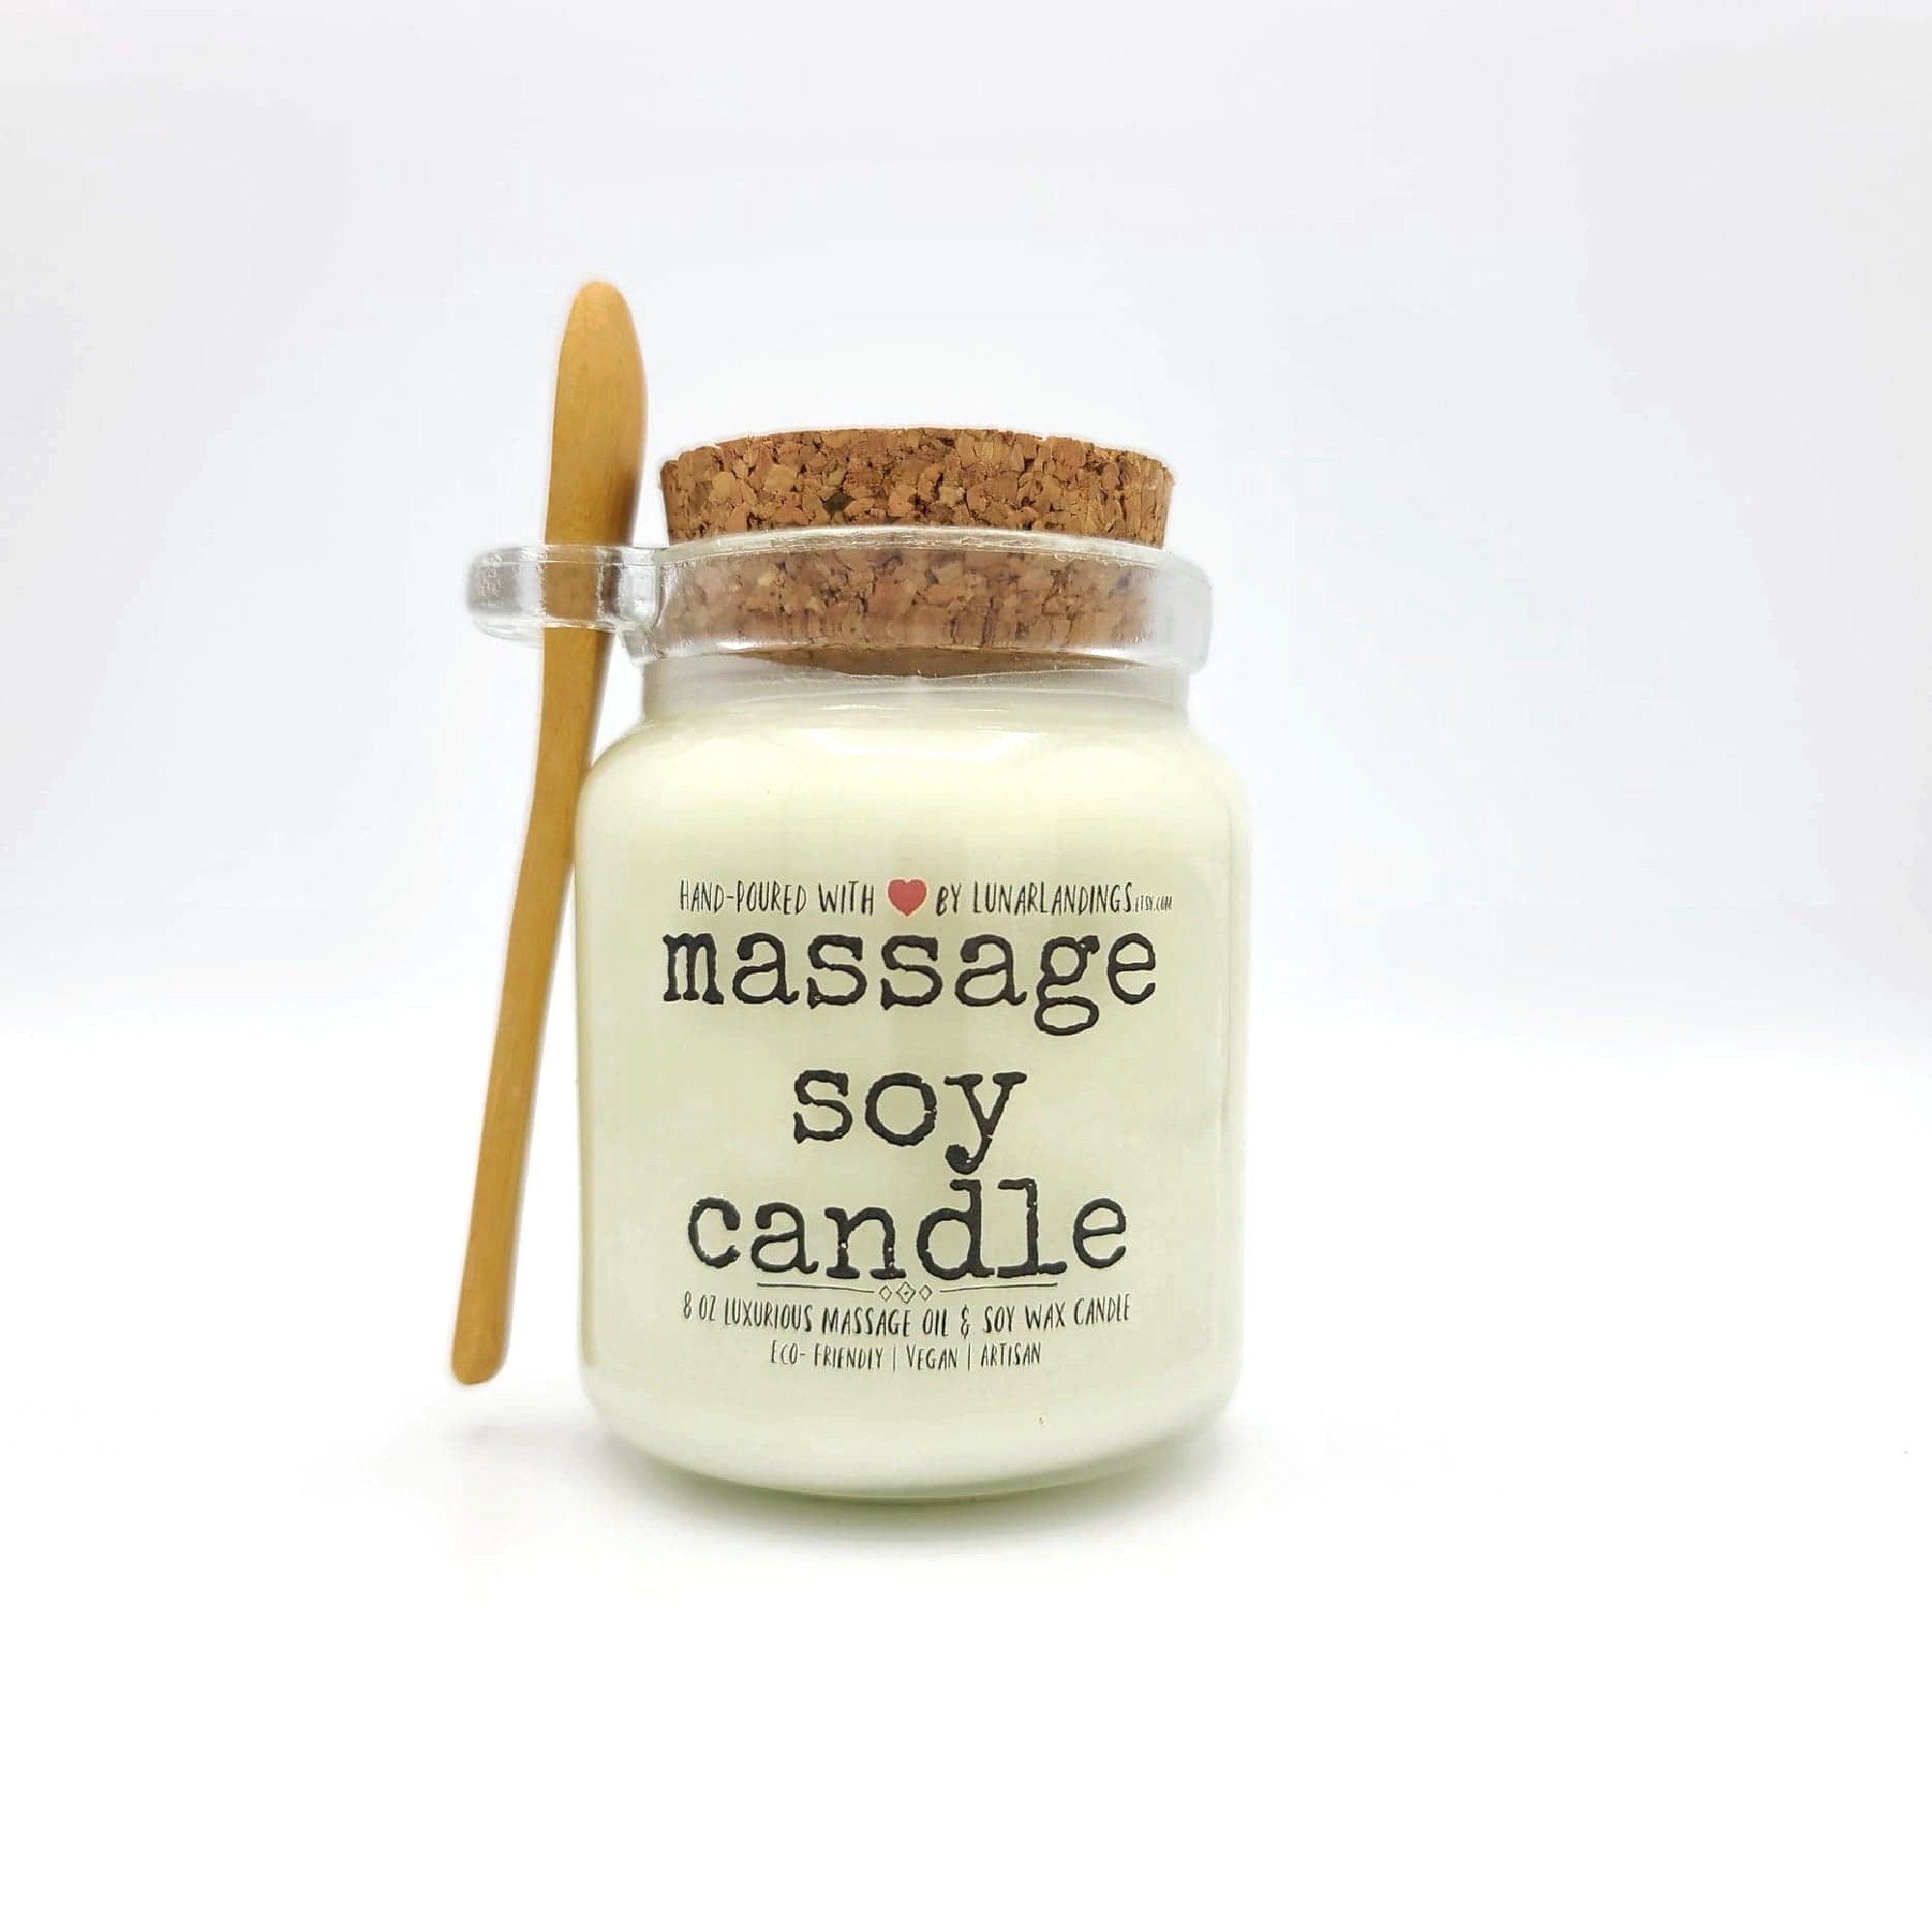 Candle Gift Anniversary Gifts Mother's Day Gifts Gift for Her Birthday Gifts Congratulations gift |soy candles|massage oil candle